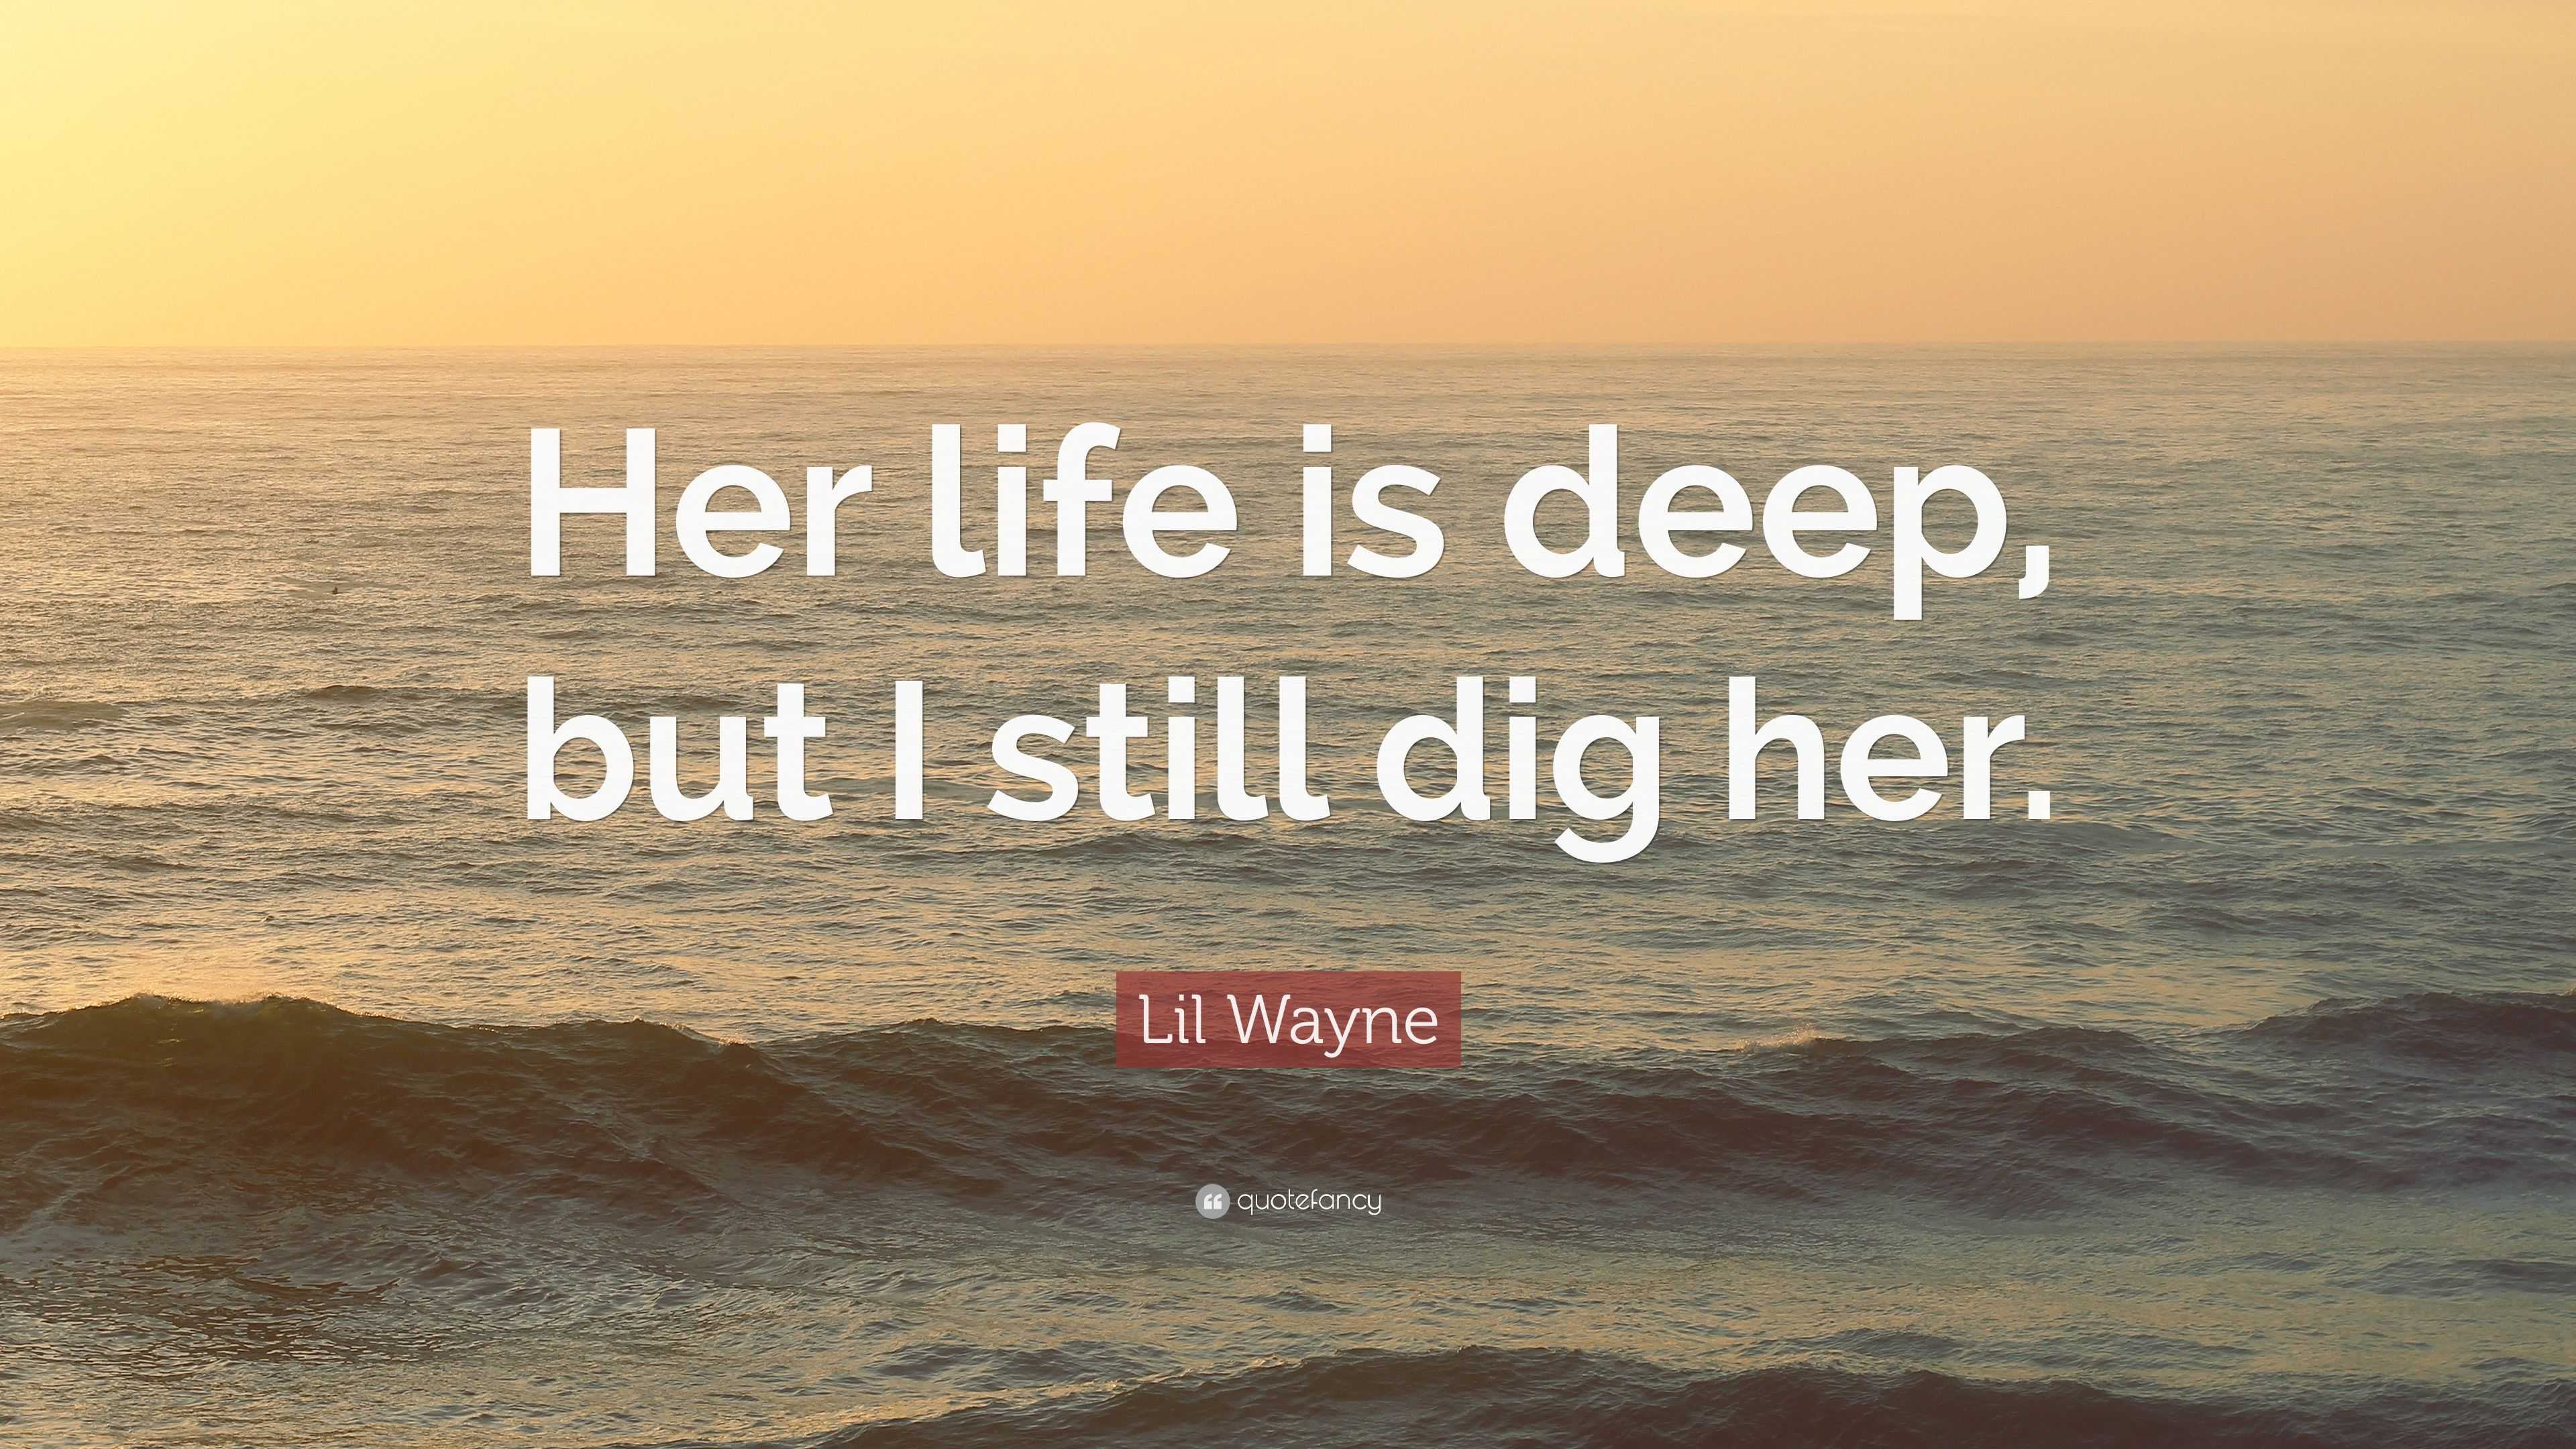 lil wayne love quotes for her